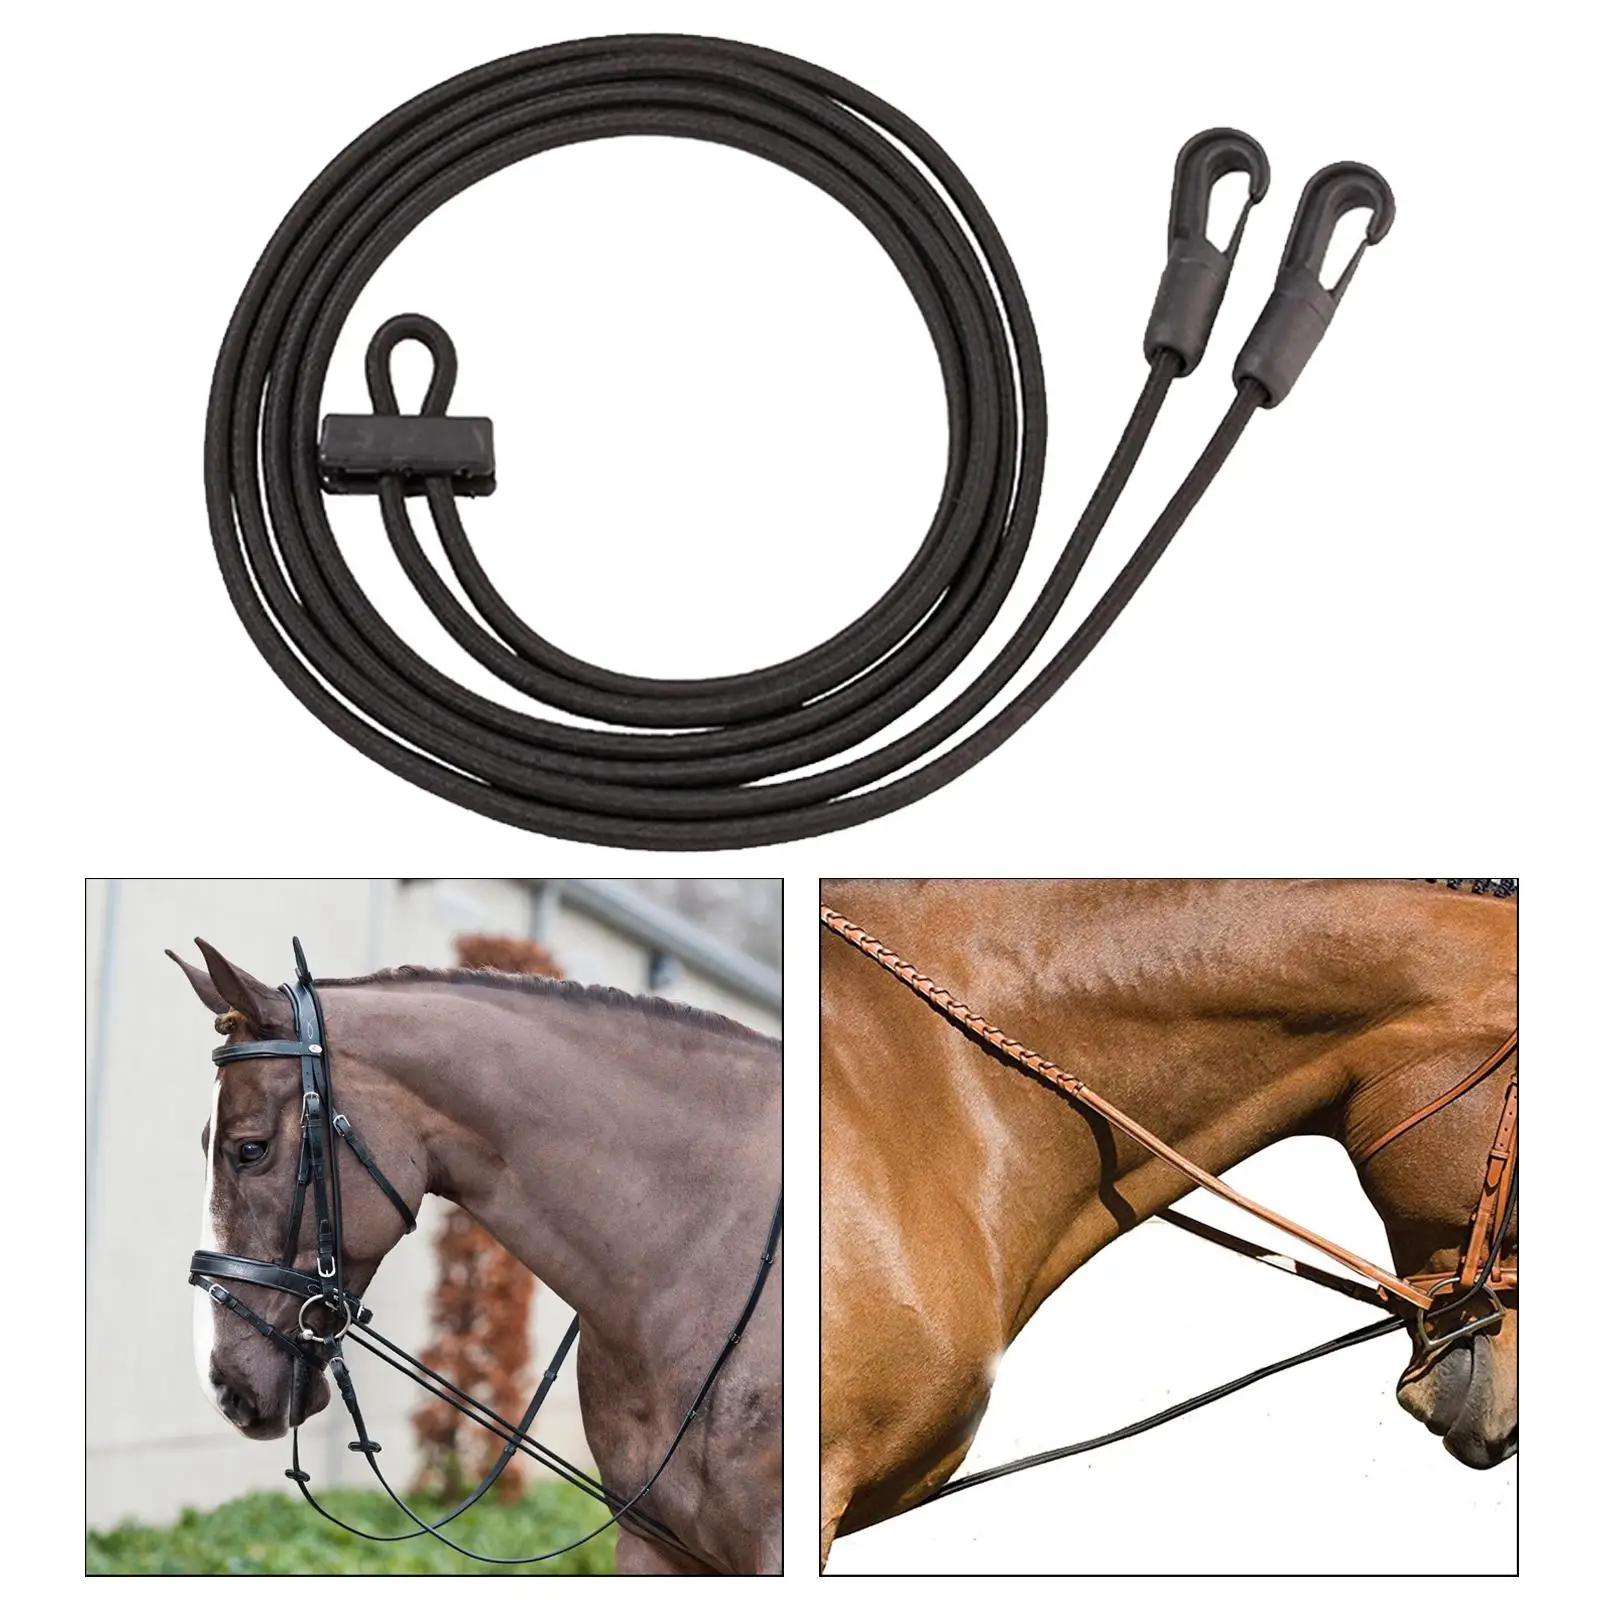 Horse Roping Reins Pulling Training Rope Headcollar for Grooming Equestrian Accessories